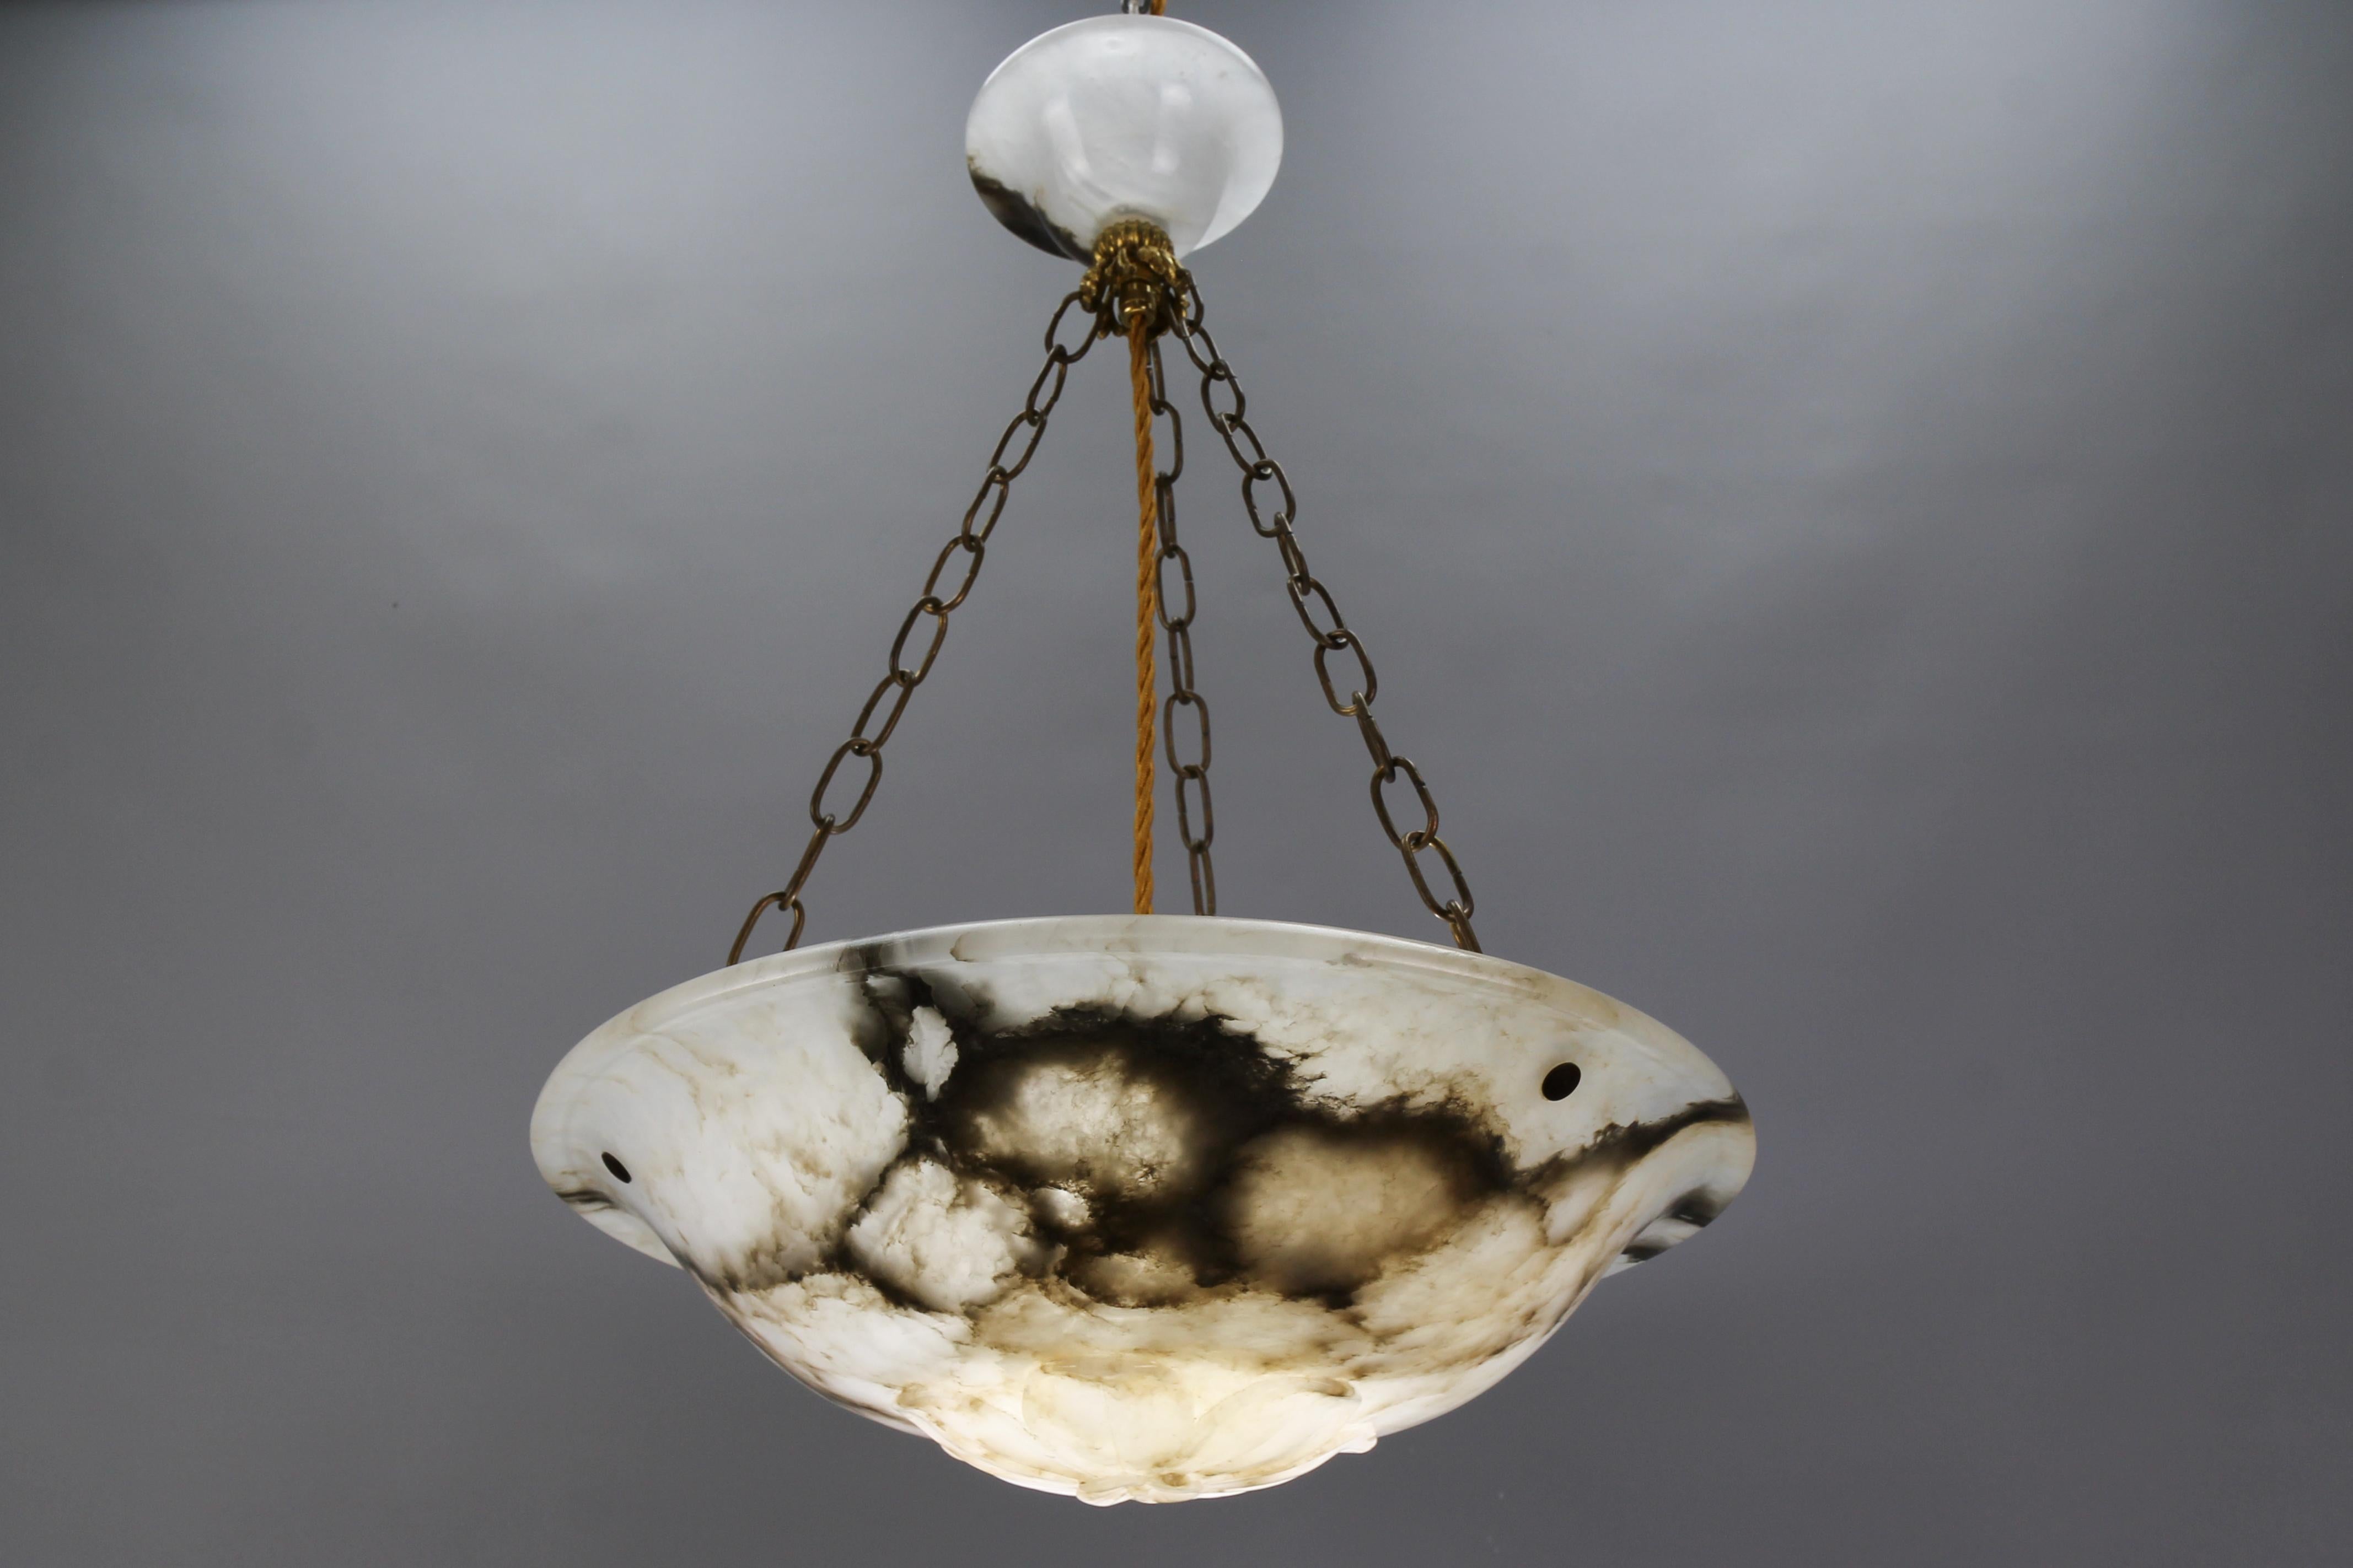 Antique French Art Deco black veined cloudy or dark white alabaster pendant light fixture.
A superb alabaster pendant ceiling light fixture from circa 1920. This richly veined and beautifully carved alabaster bowl is suspended by three chains and an